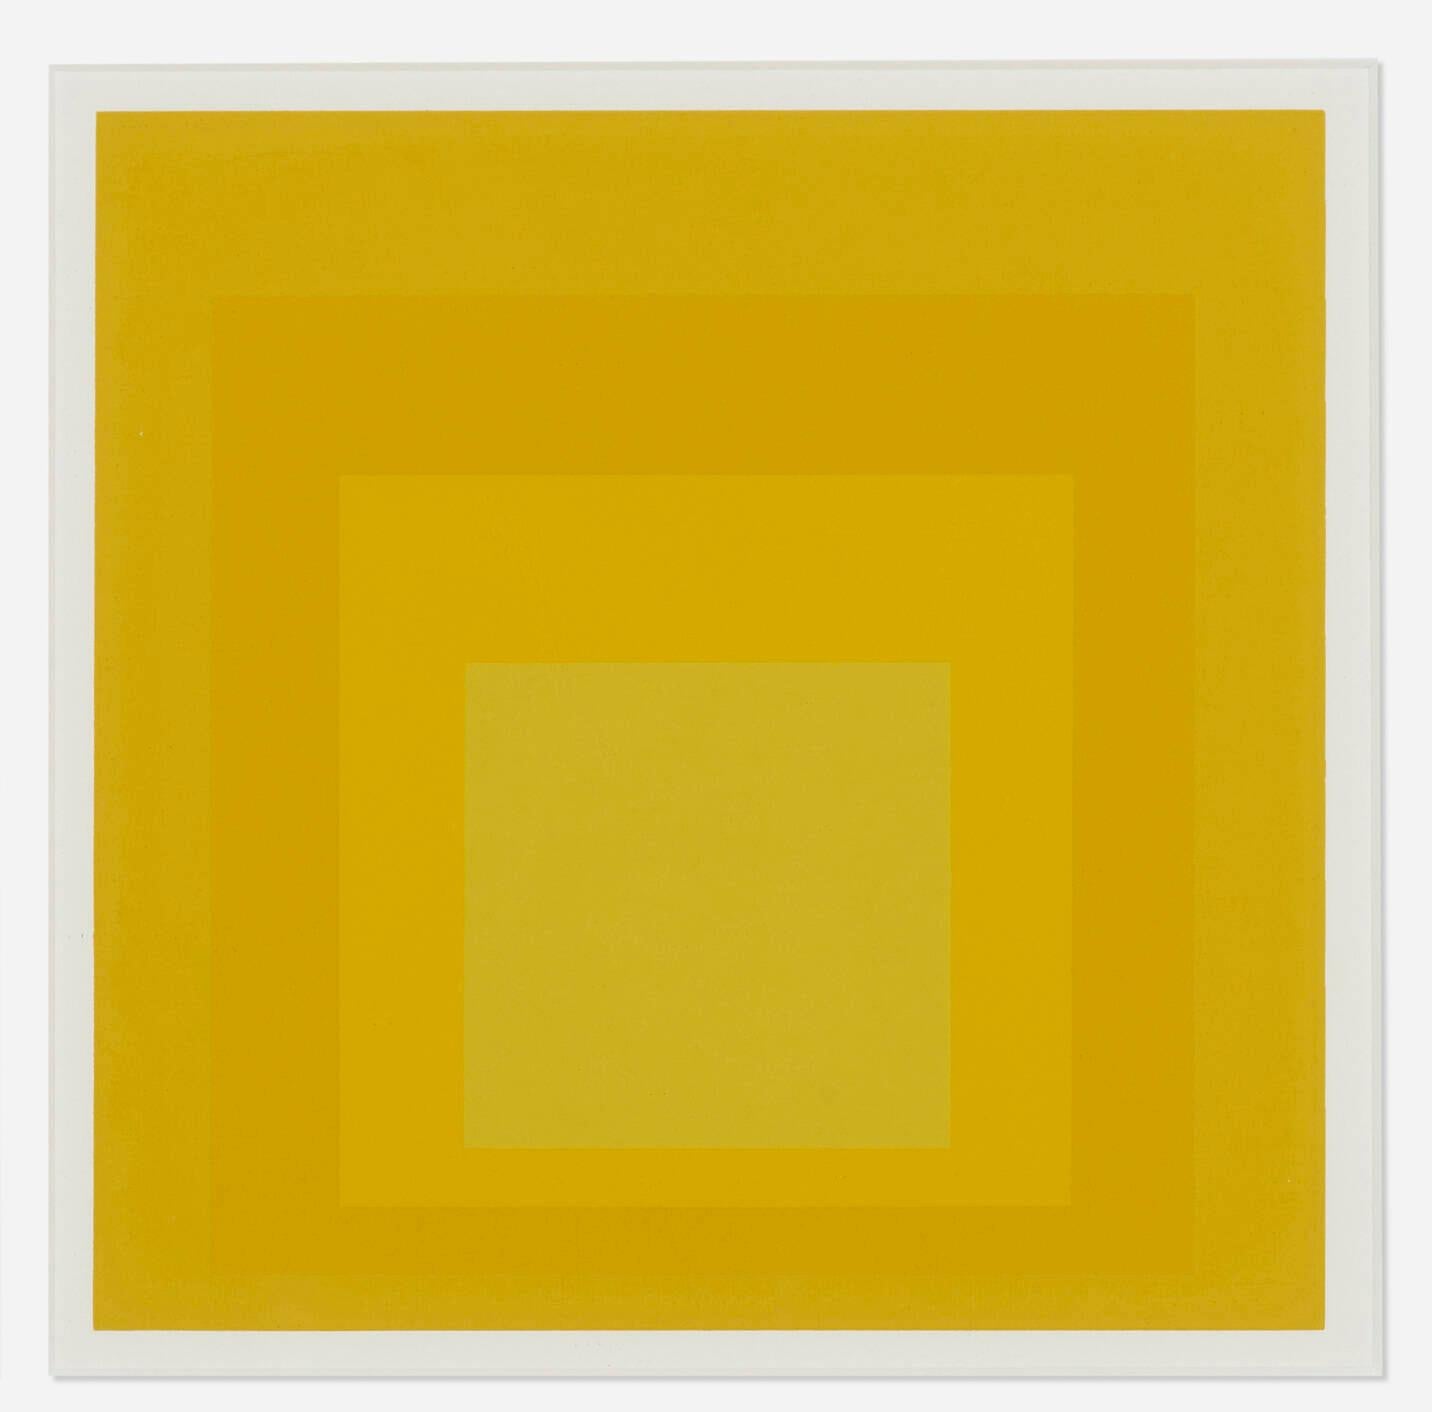 Artist: Josef Albers, German (1888 - 1976)
Title: "Homage to the Square : Saturated 1968" From New Paintings NY First edition
Year: 1968
Medium: Screenprint
Edition Size: Unknoun, presumed small edition
Image Size: 7.5 x 7.5 Inches
over all with